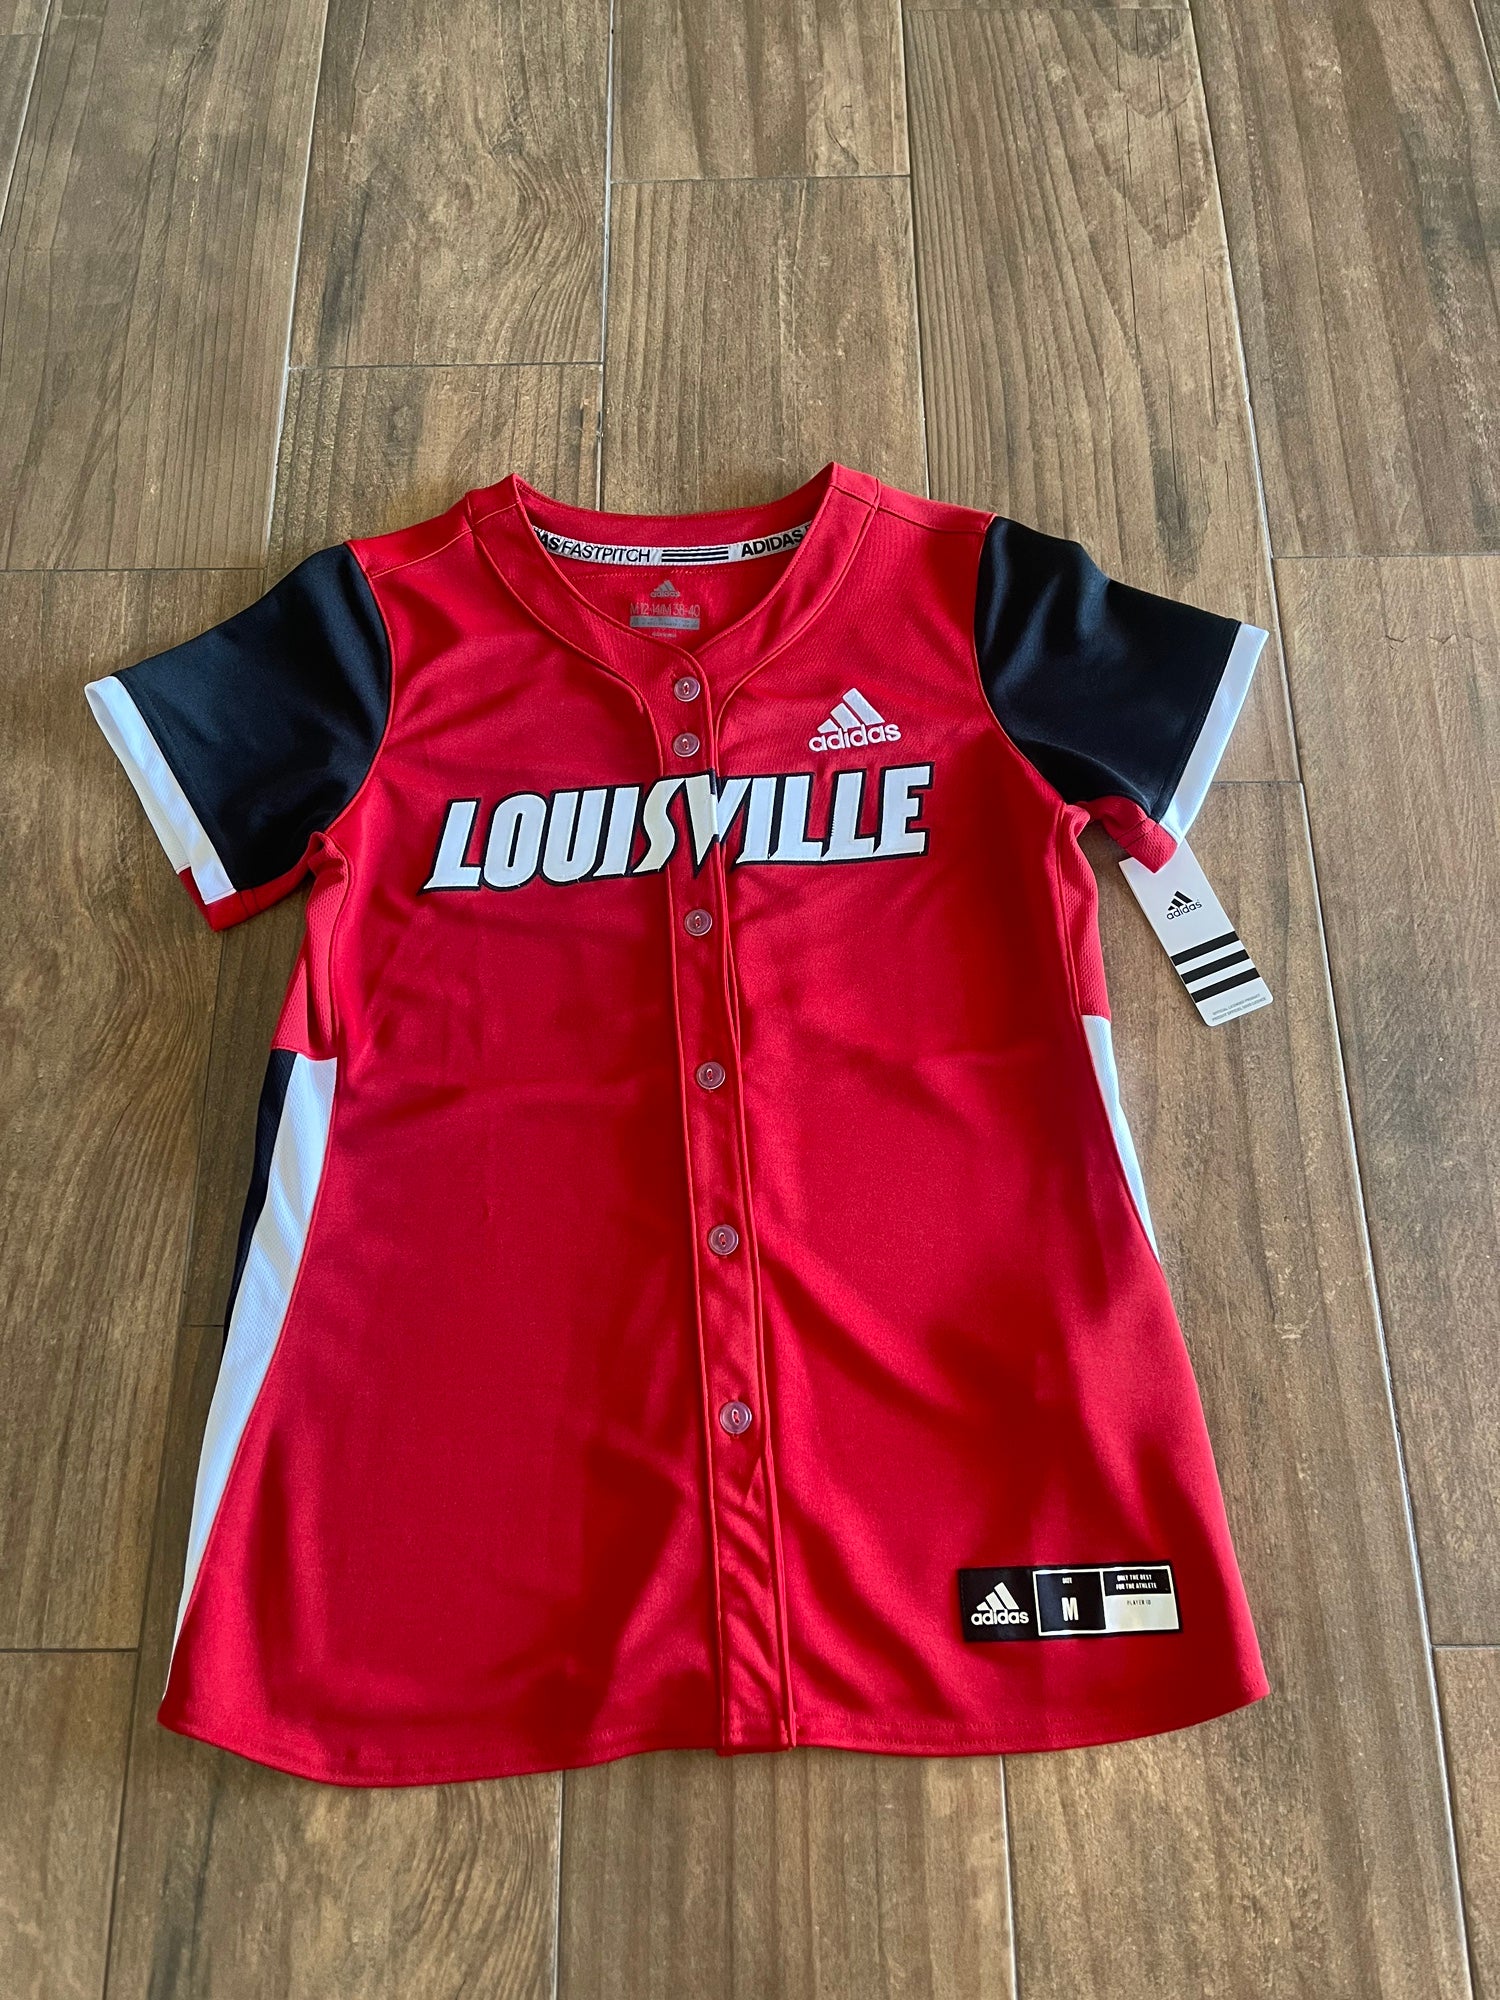 Adidas Louisville Jersey Red Cardinals Jackson 17 Youth M 12-14